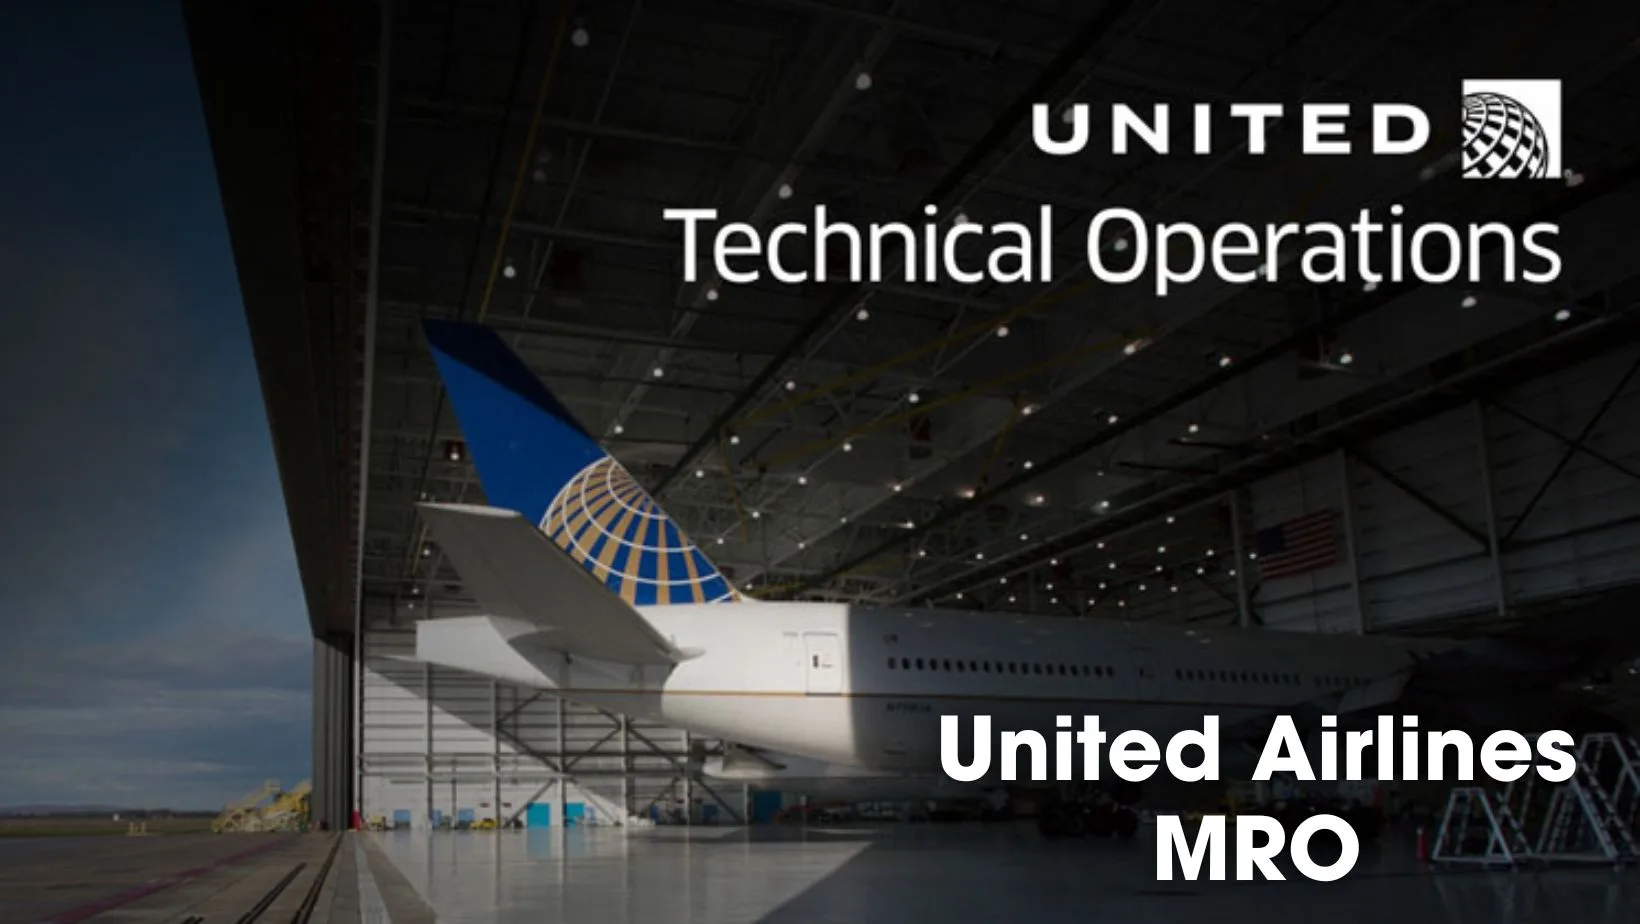 Know About United Airlines MRO